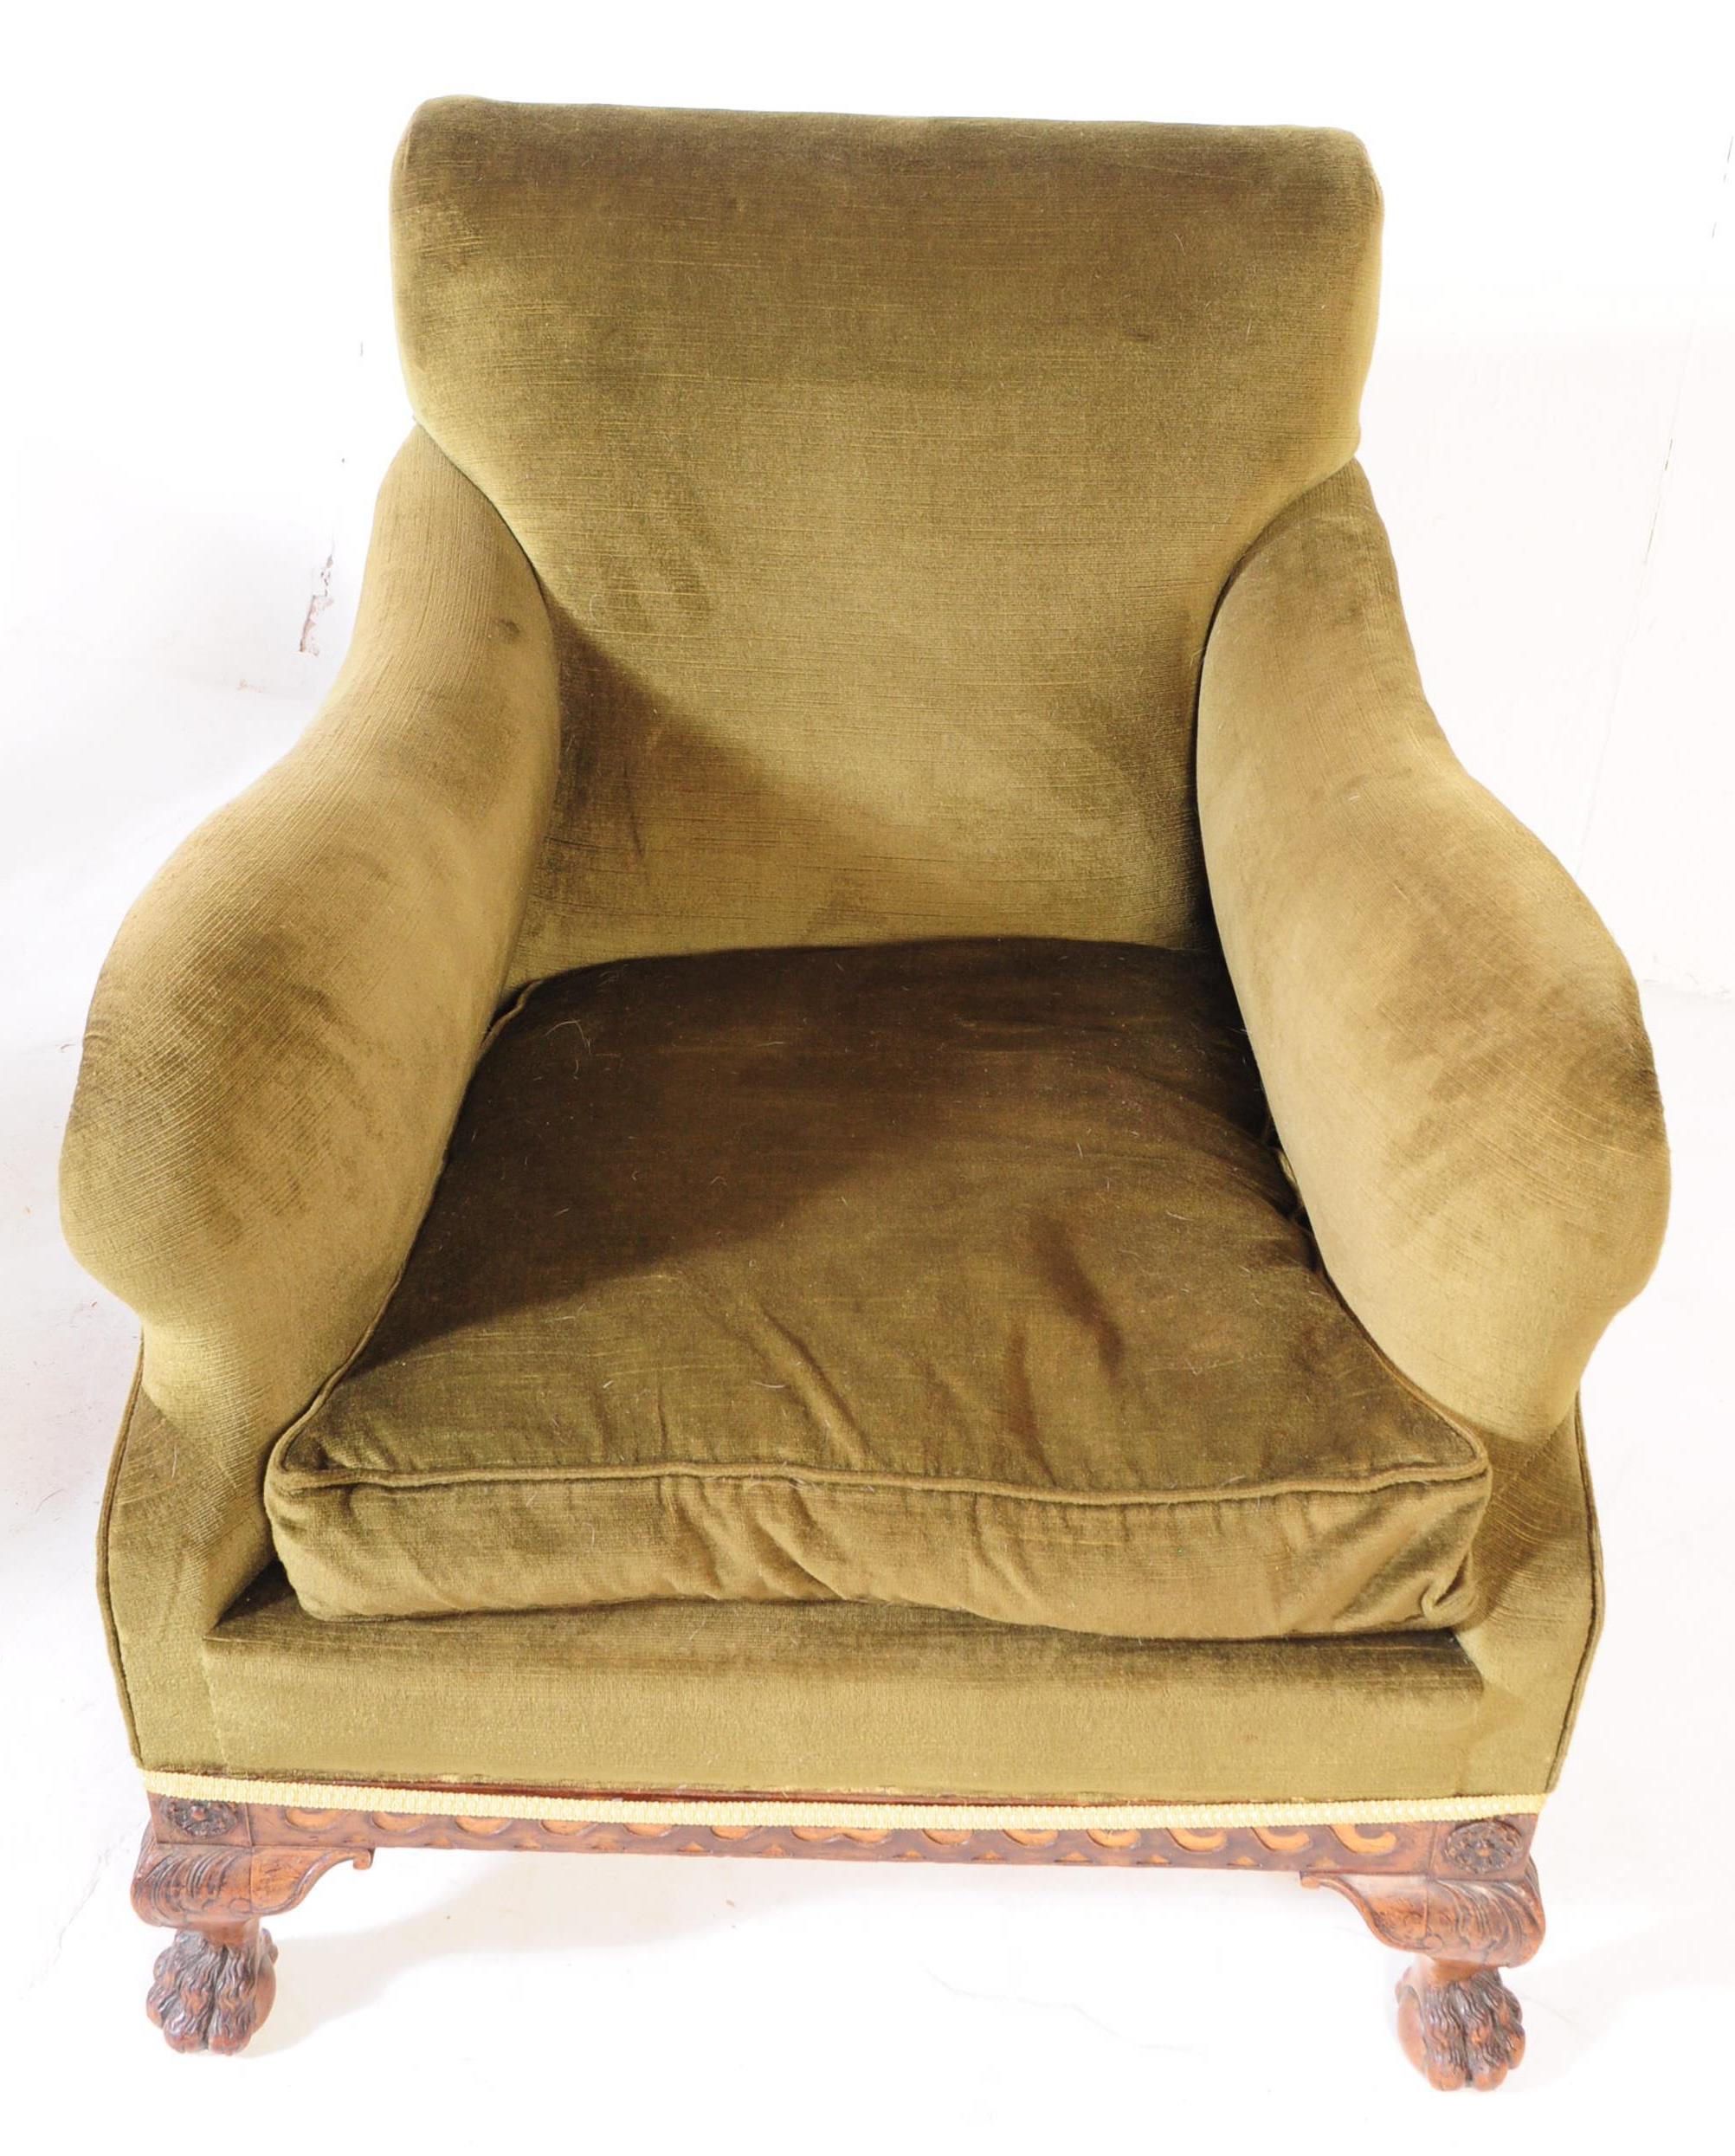 TWO VINTAGE 20TH CENTURY HIS & HERS FIRESIDE ARMCHAIRS - Image 7 of 7